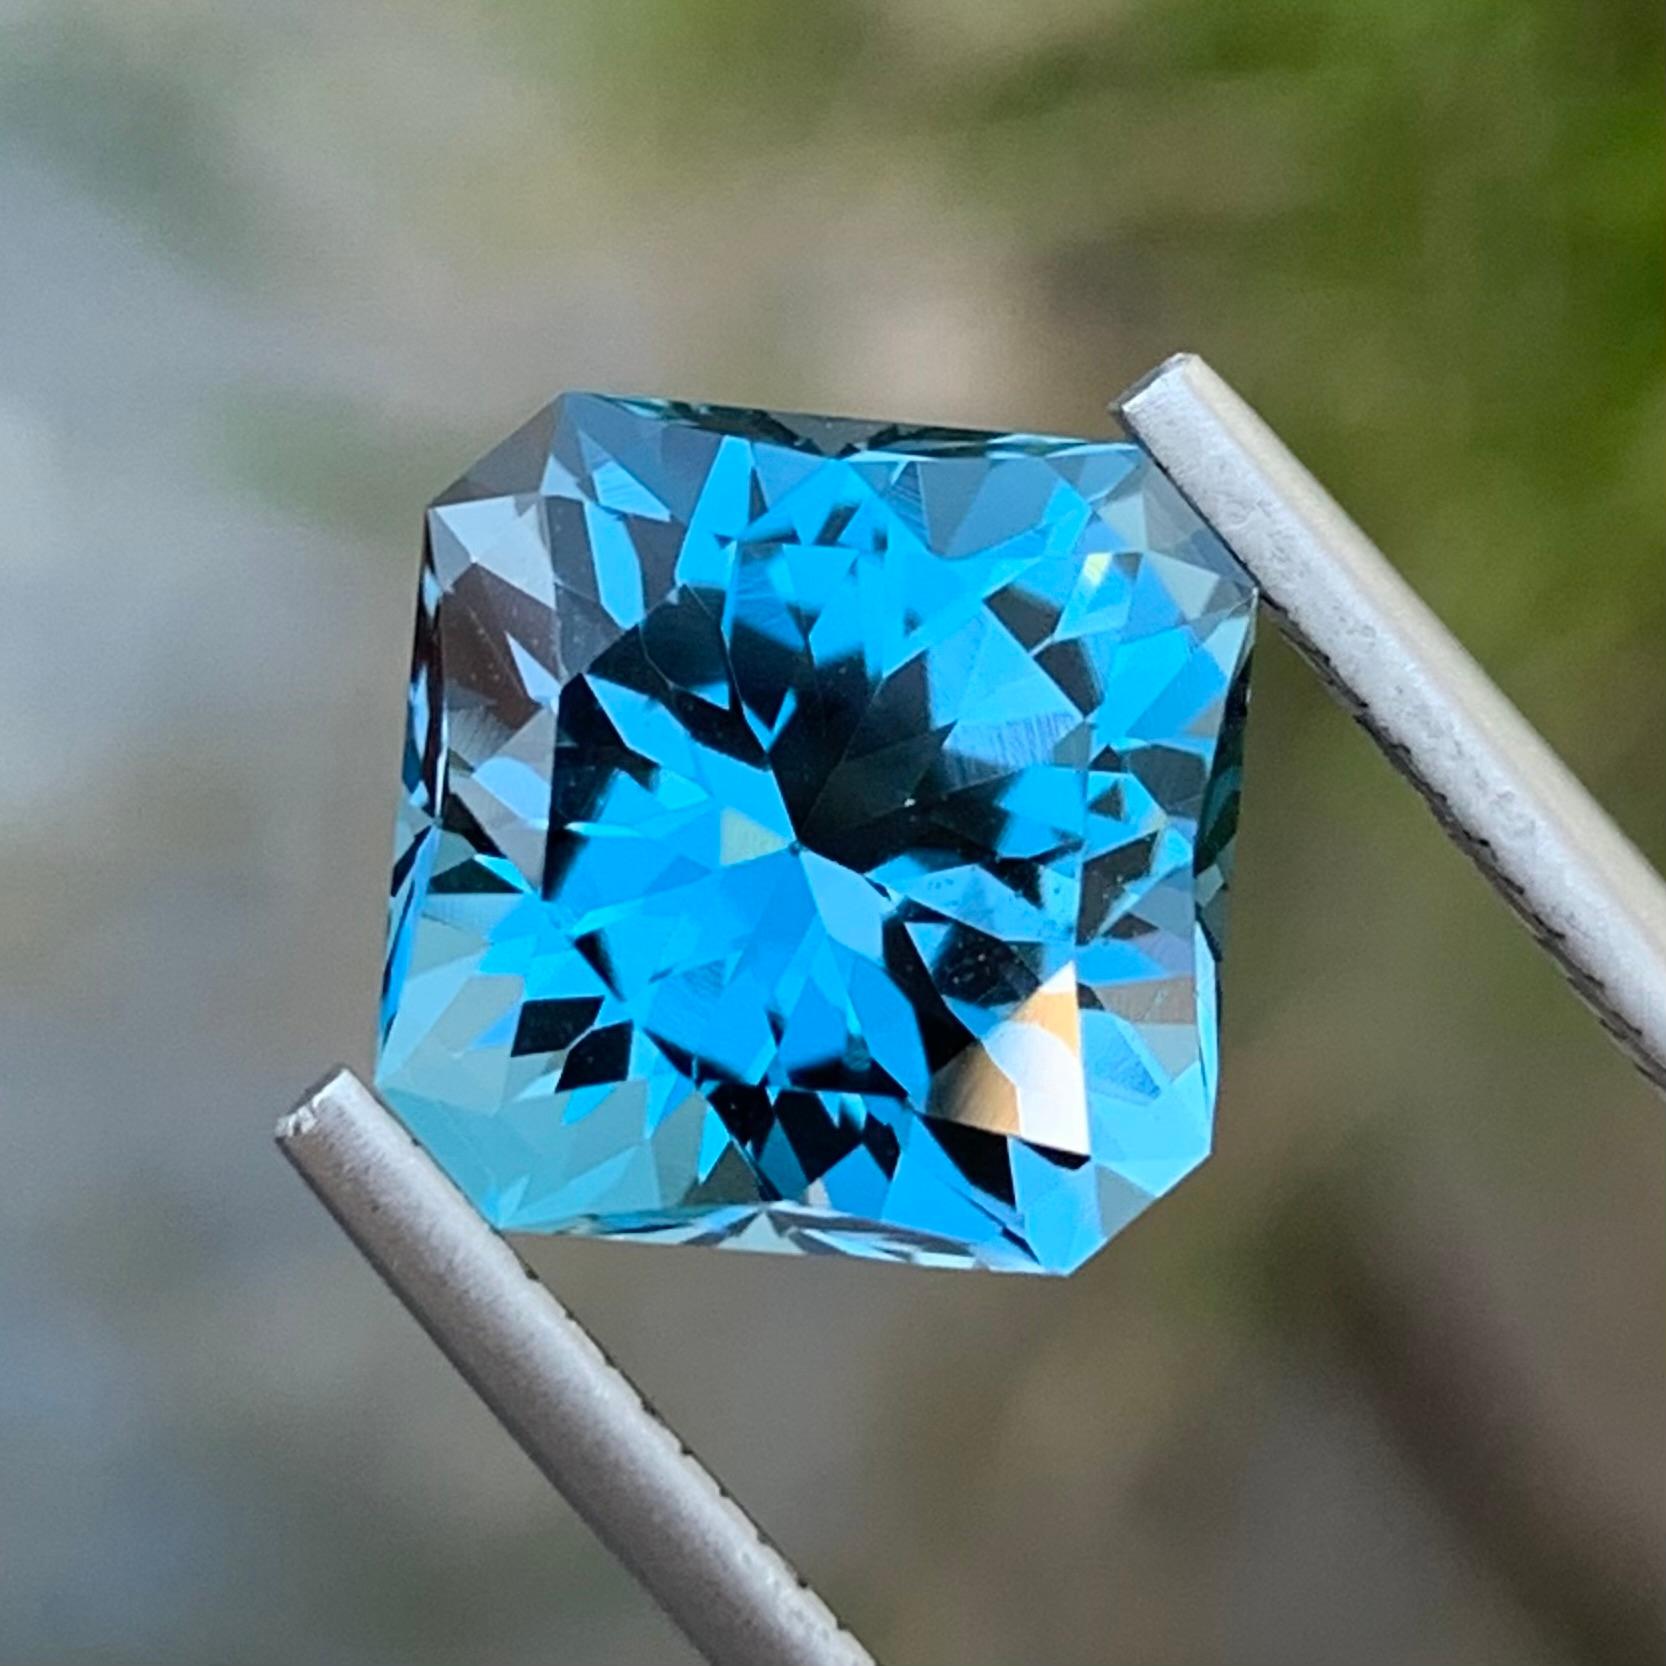 Loose London Blue Topaz 
Weight: 8.20 Carats 
Dimension: 10.6 x 10.6 x 8.4 Mm
Shape: Square 
Cut: Fancy 
Certificate: On Demand 
Origin: Brazil

London Blue Topaz, a captivating gemstone renowned for its rich, deep blue hue, stands out as a